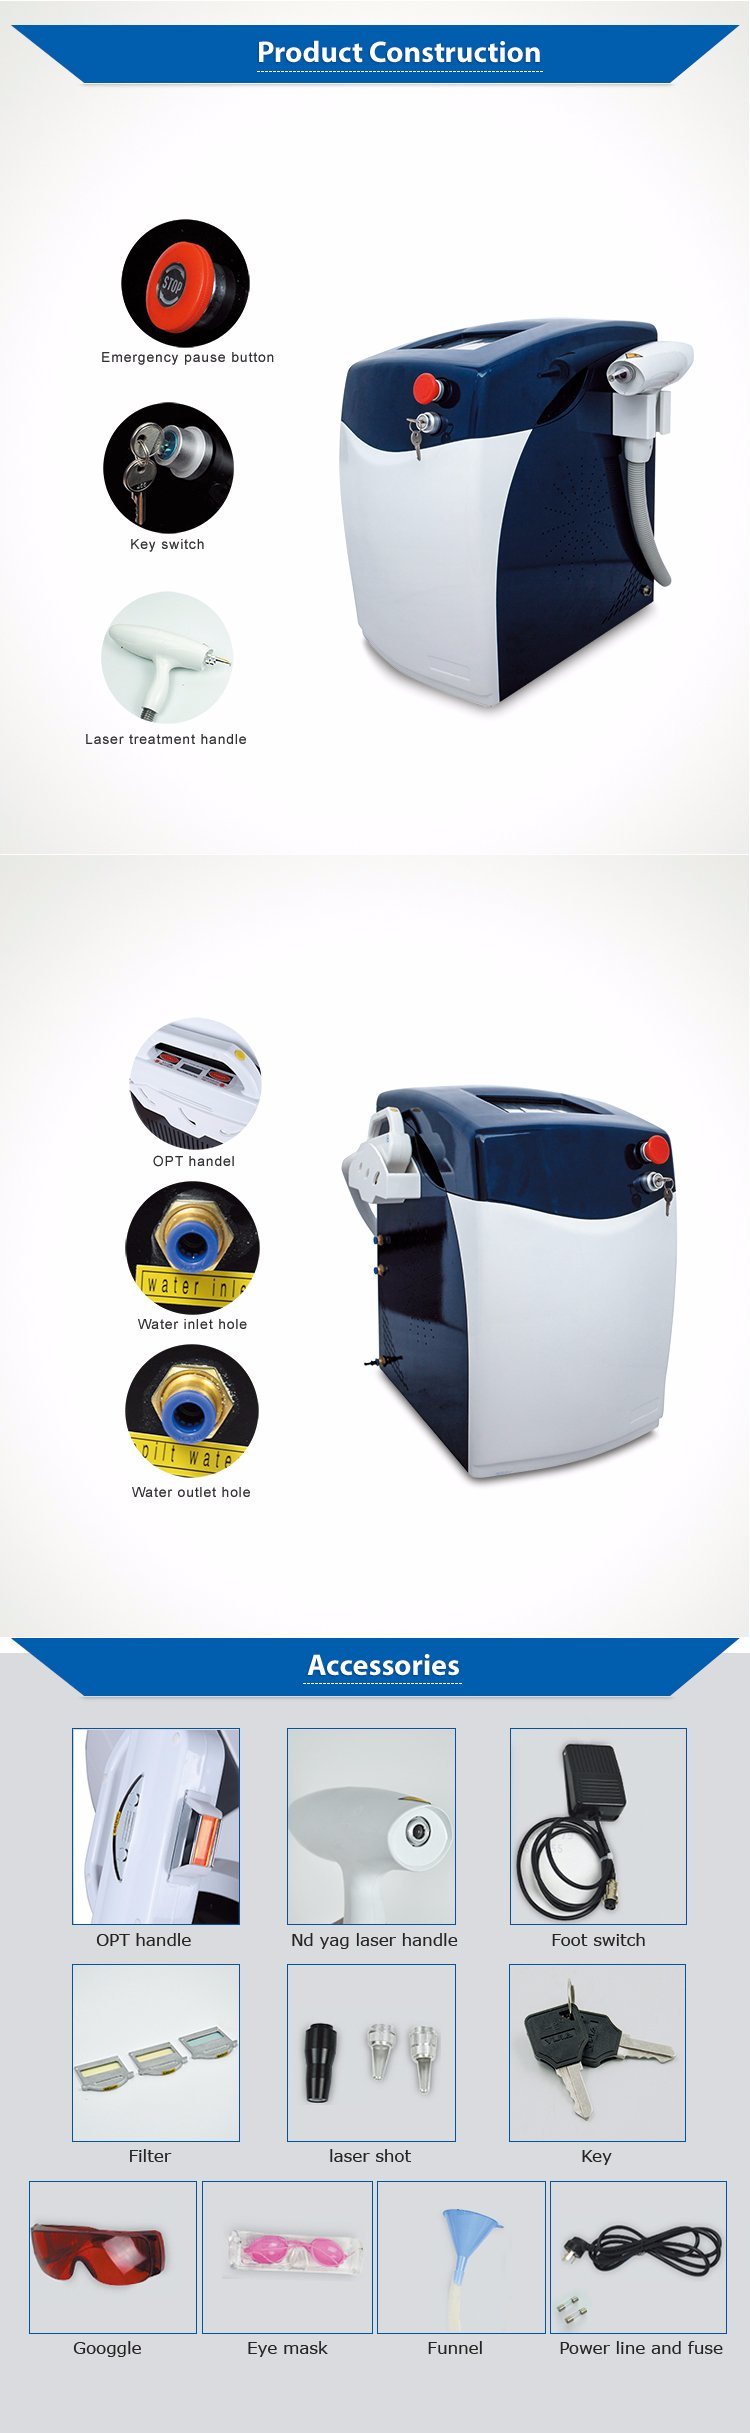 Long Pulse ND YAG Laser for Hair& Tattoo Removal Machine